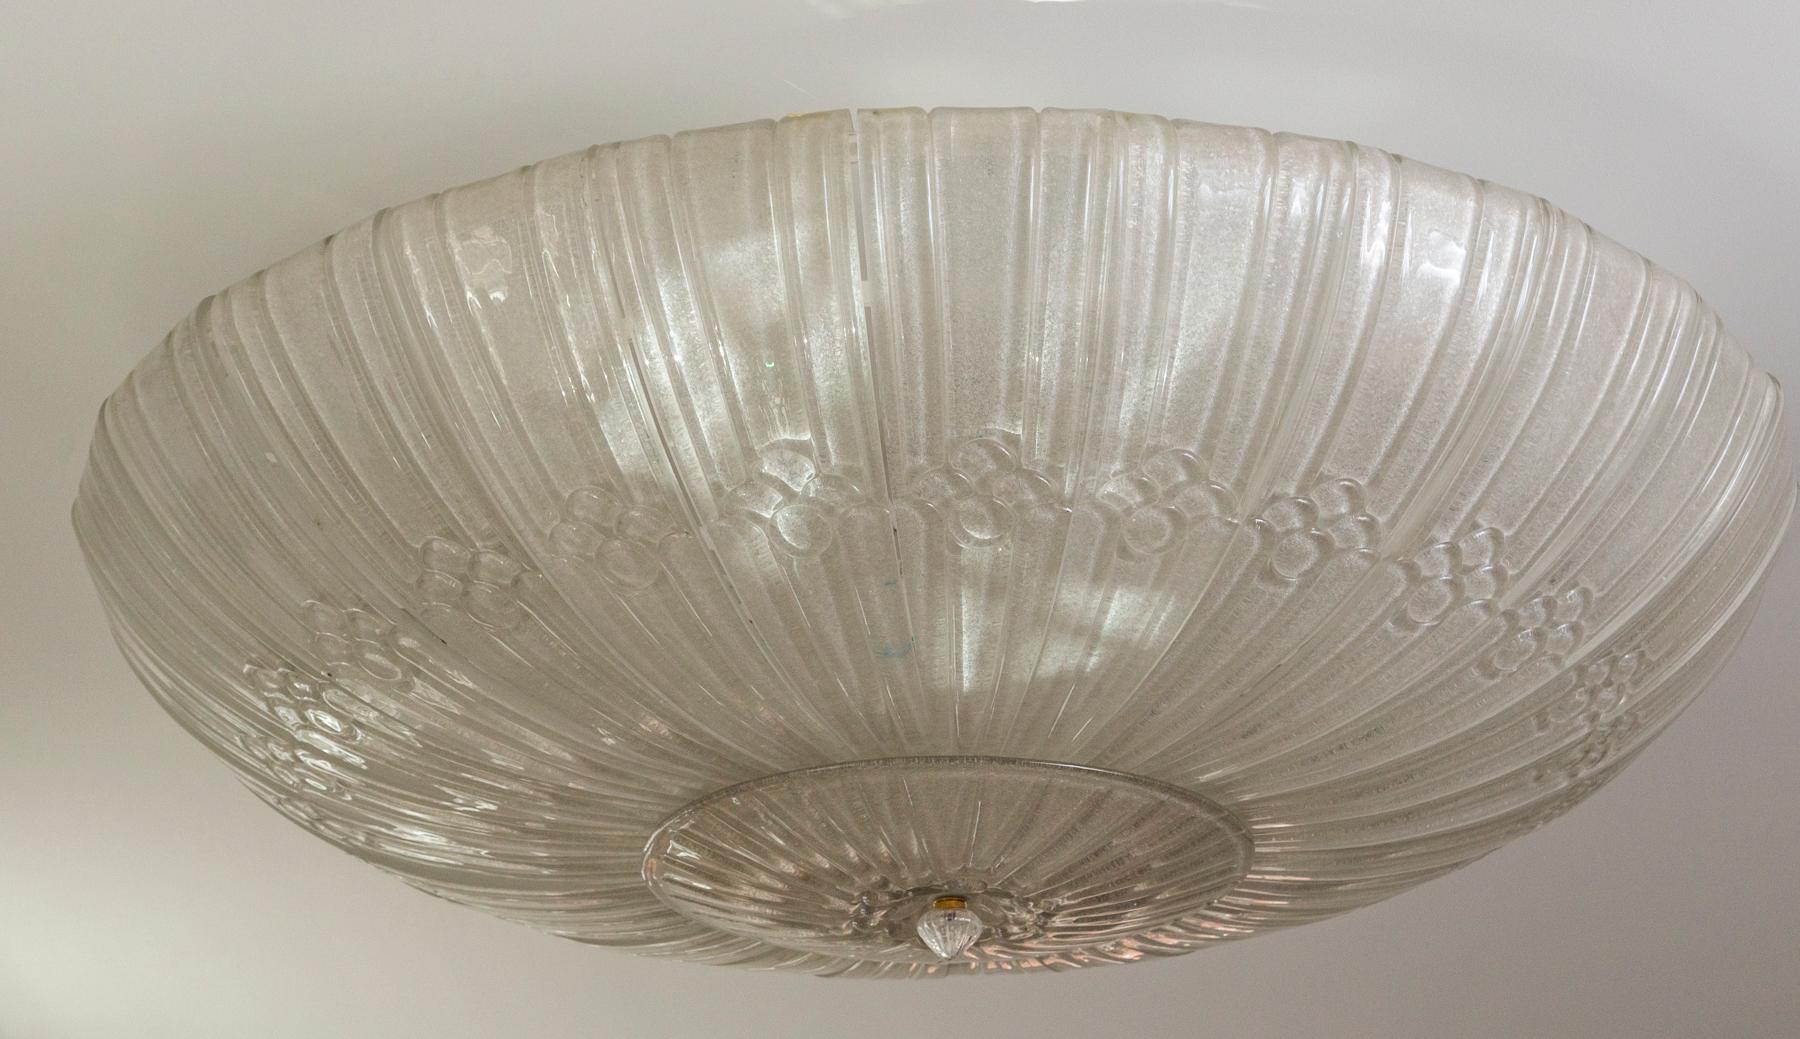 Italian Monumental Art Deco Style Dome-Shaped Ceiling Fixture by Barovier, UL Certified For Sale